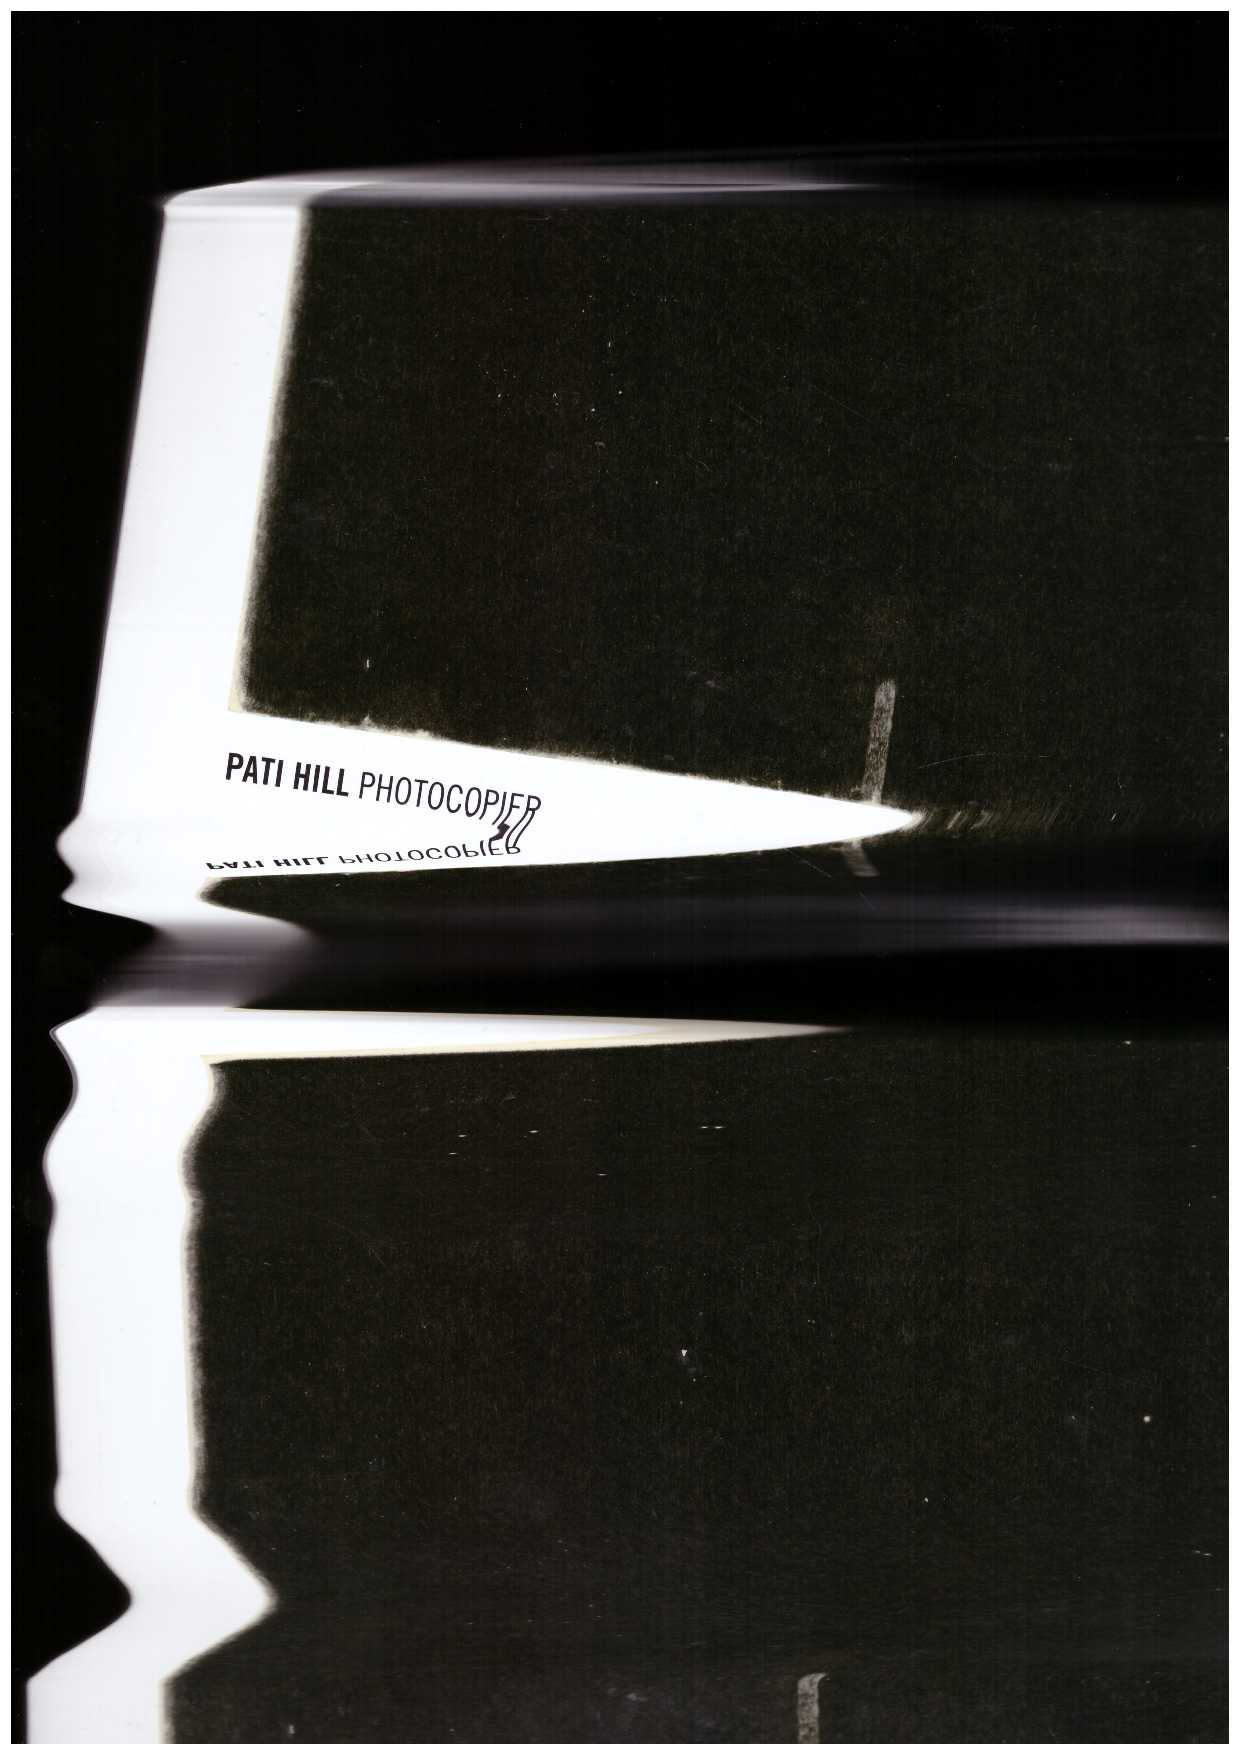 TORCHIA, Richard; SEE, Zachary (eds) - Photocopier. A Survey of Prints and Books (1974-83)